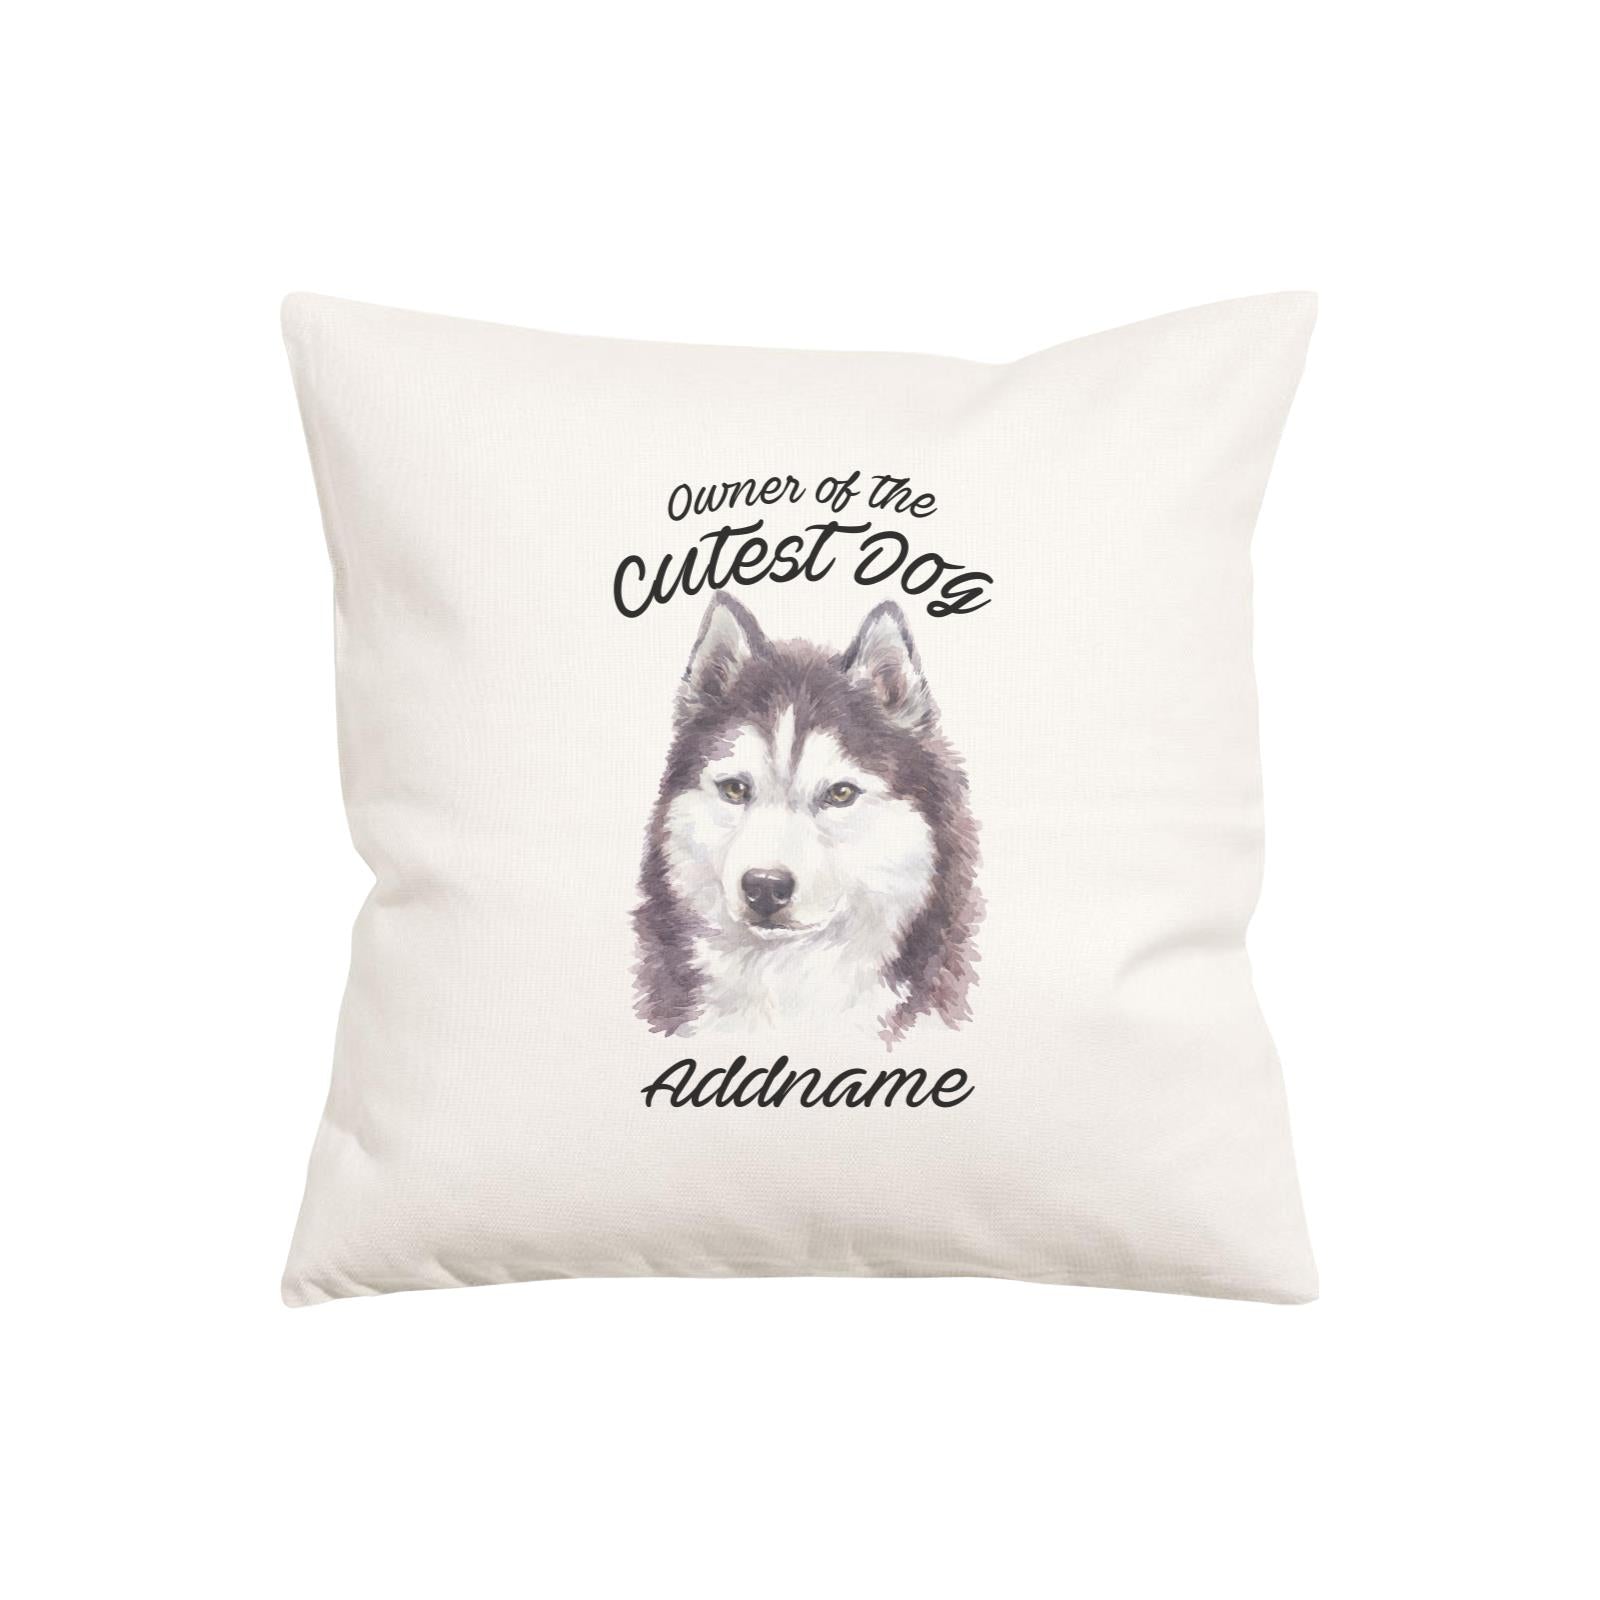 Watercolor Dog Owner Of The Cutest Dog Siberian Husky Cool Addname Pillow Cushion